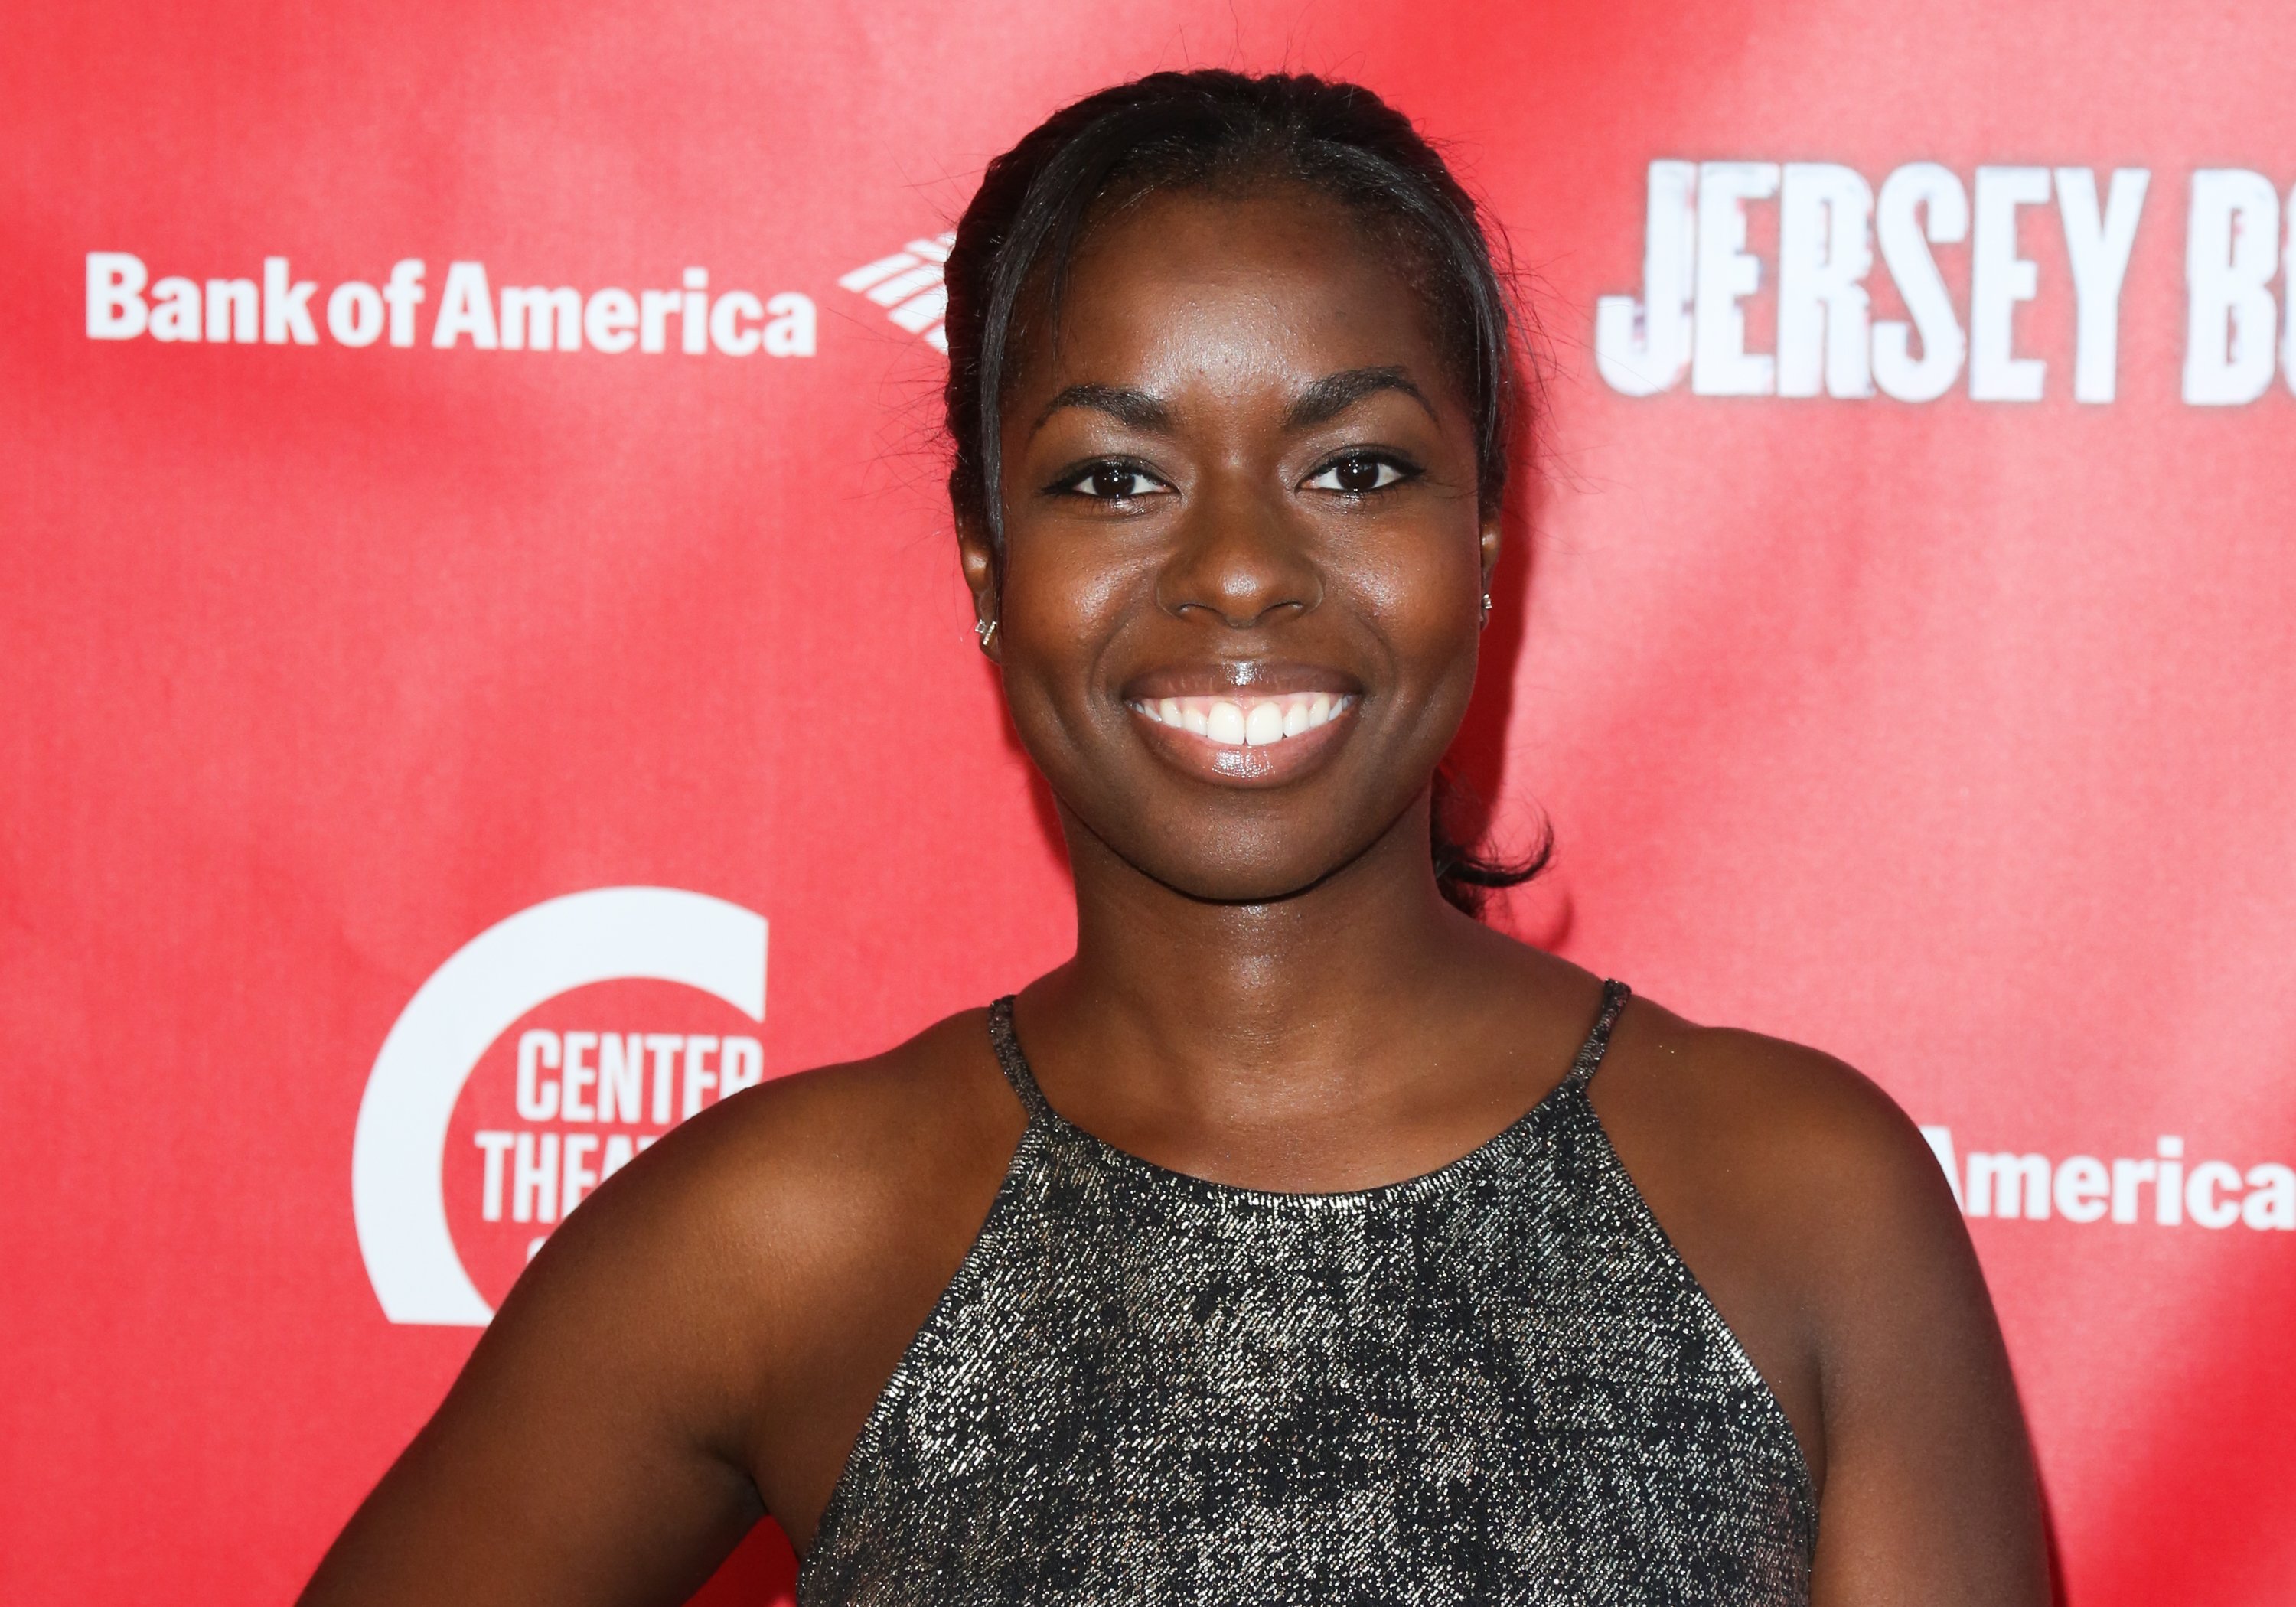 Camille Winbush at a showing of "Jersey Boys" at the Ahmanson Theatre on May 18, 2017 in Los Angeles, California. |Source: Getty Images